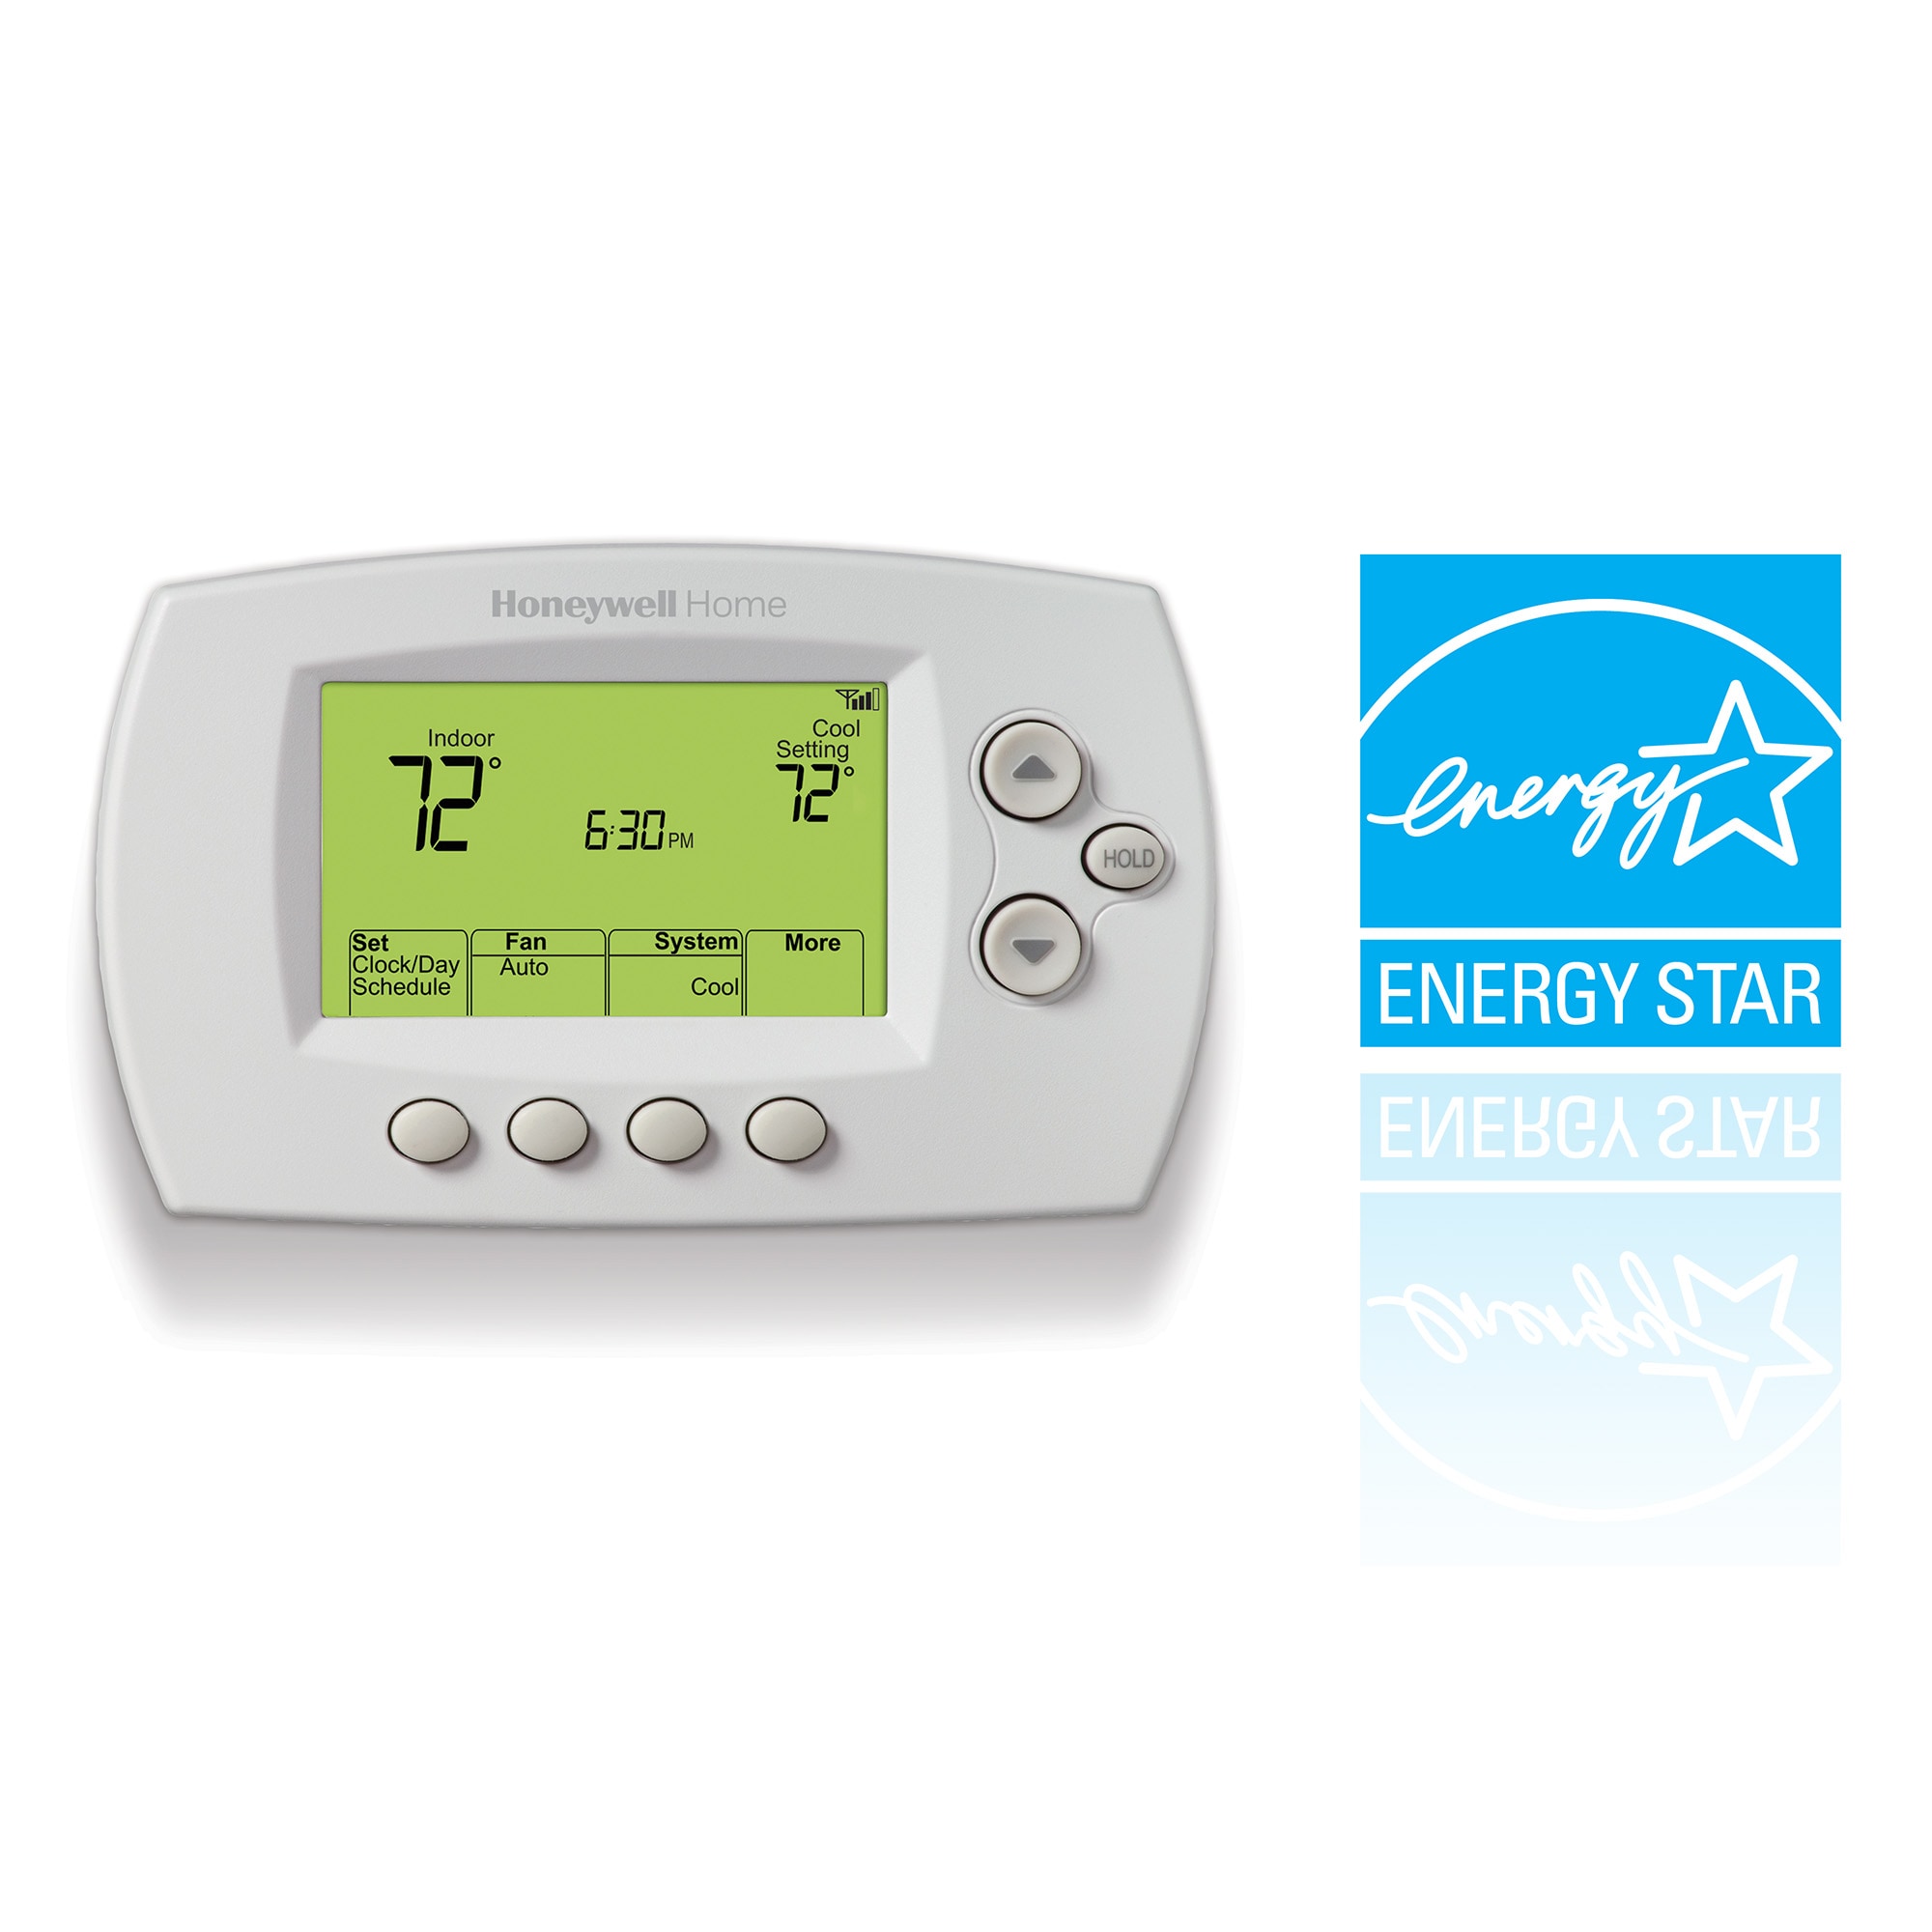 Honeywell Rth6580wf 7-Day Programmable Wi-Fi Thermostat